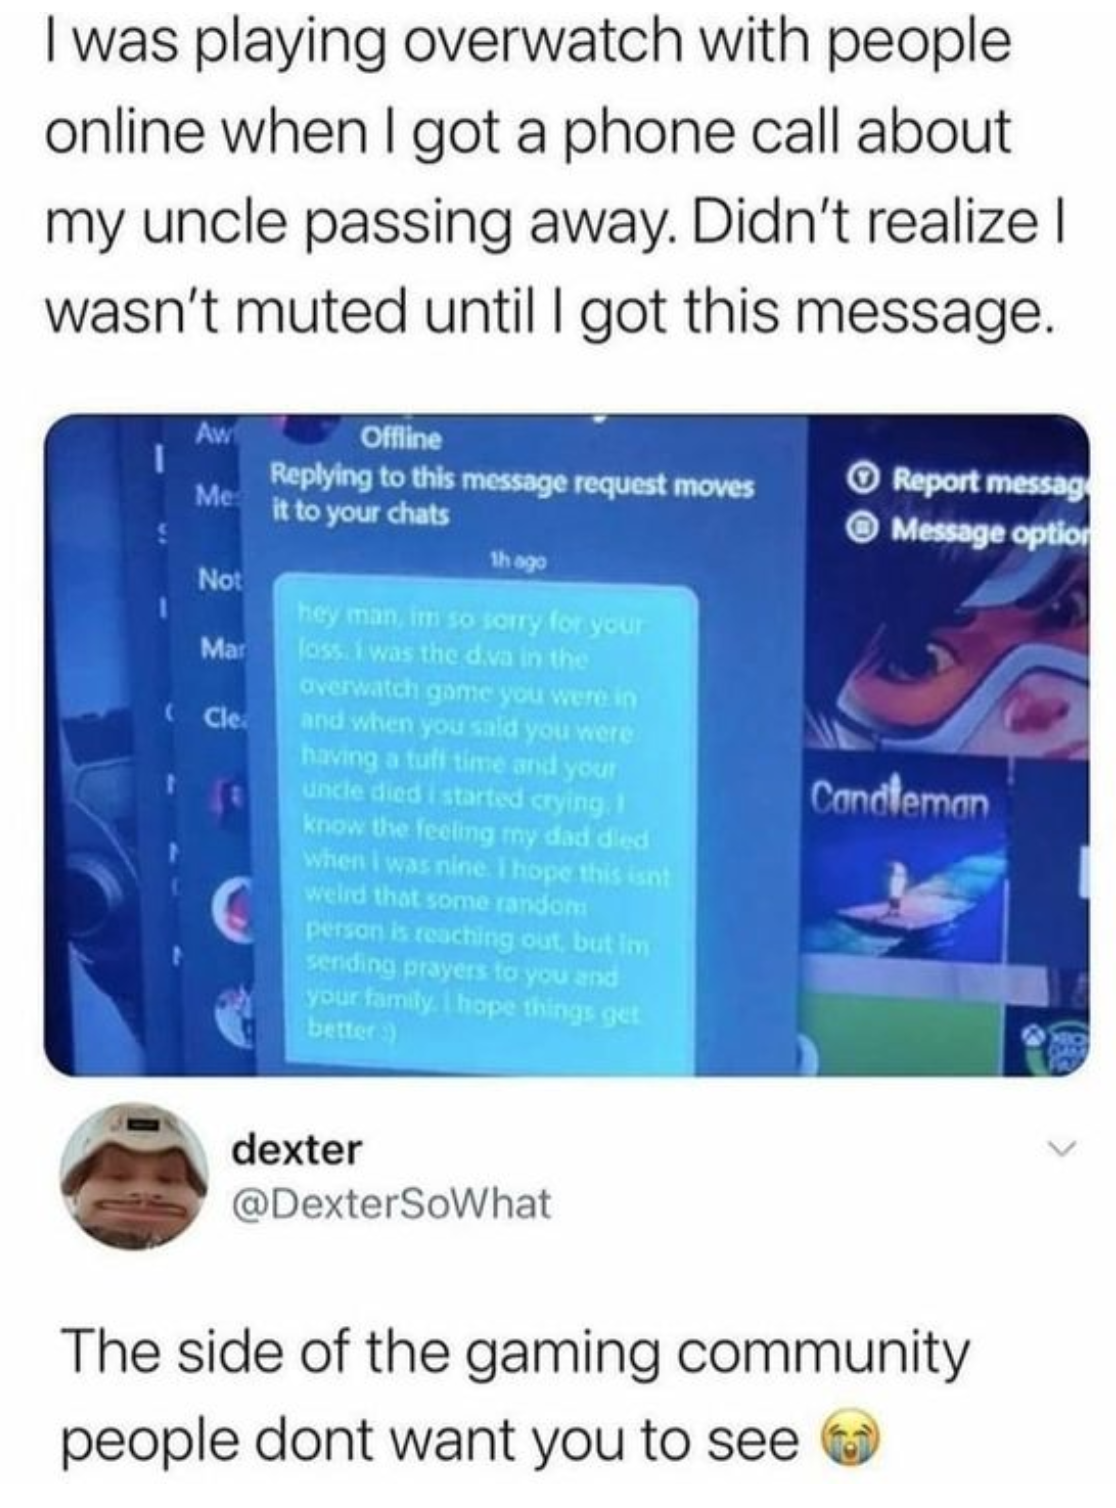 funny gaming memes - water - I was playing overwatch with people online when I got a phone call about my uncle passing away. Didn't realize wasn't muted until I got this message. Offline this message request moves it to your chats Report message Message o